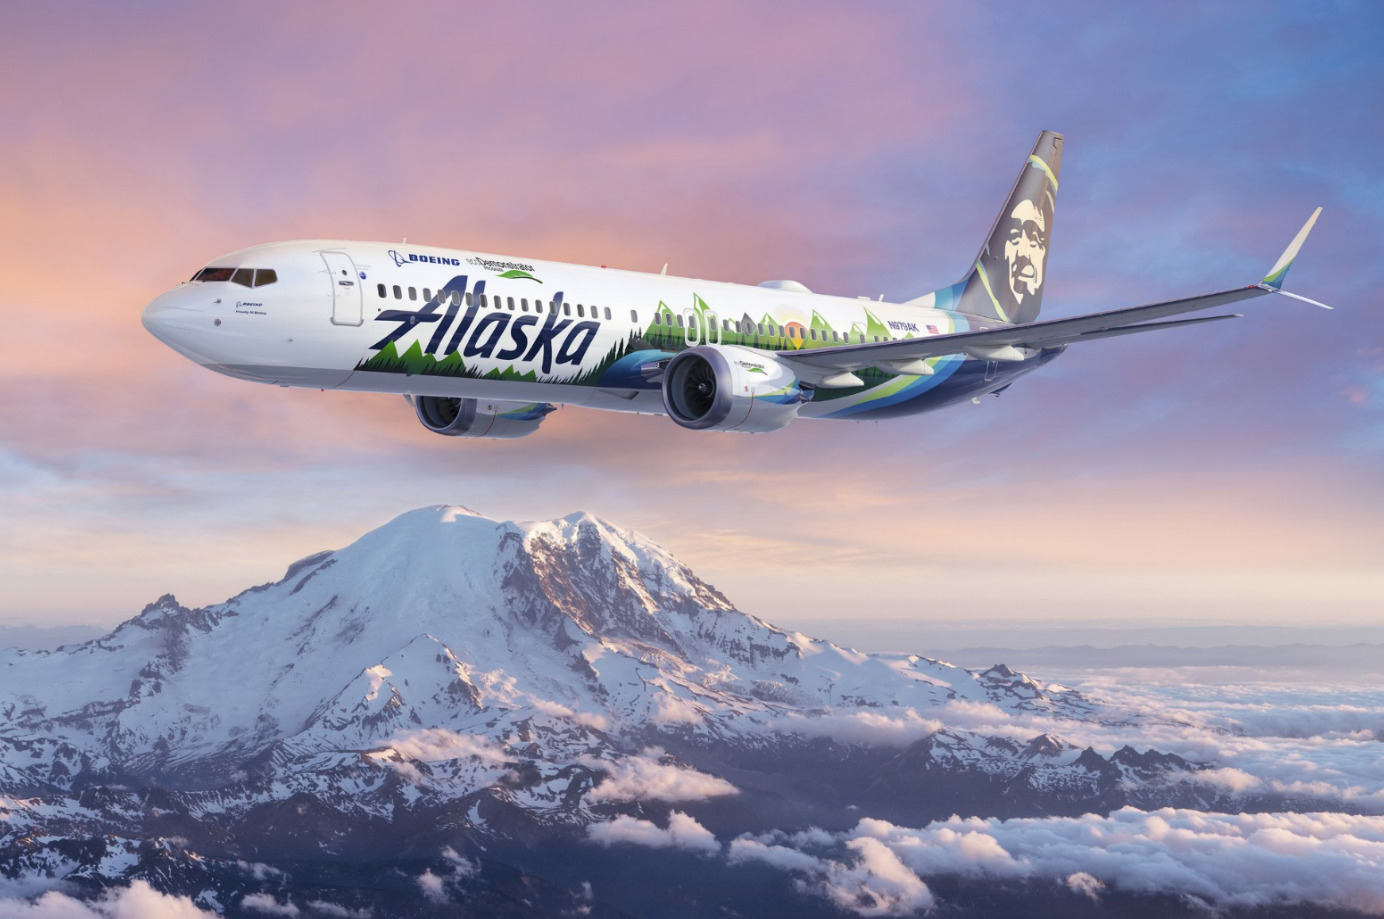 An Alaska Airlines 737-9 is serving as the flying test lab for Boeing's 2021 ecoDemonstrator program, which will evaluate about 20 technology projects